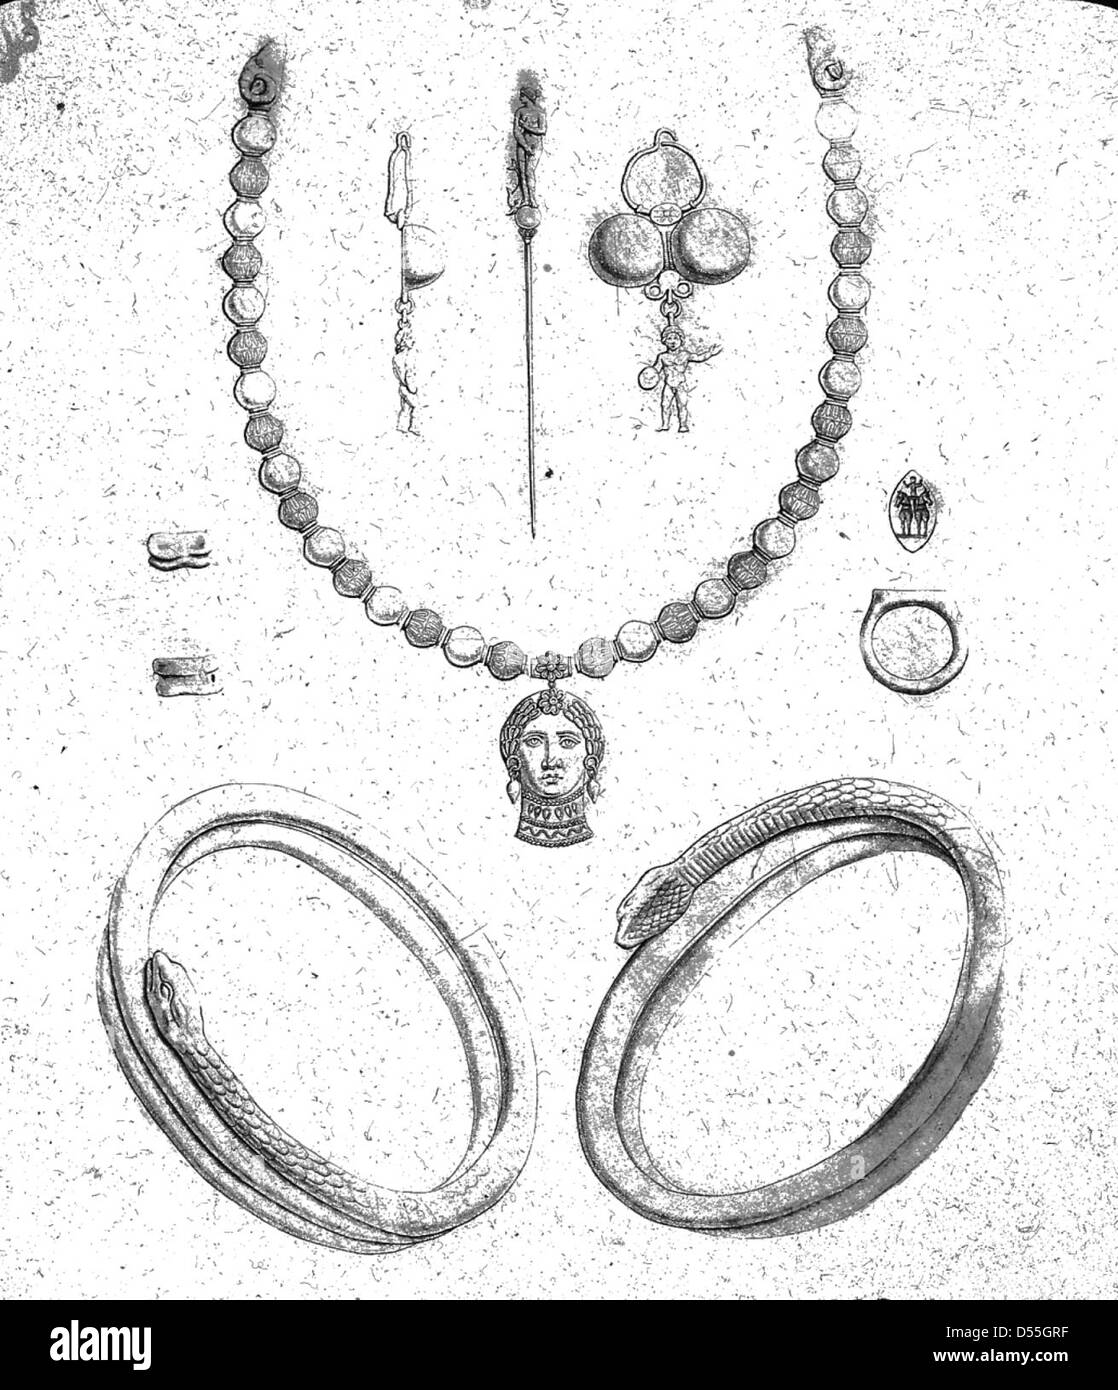 Pompeii: Drawings of gold jewelry from Pompeii. Stock Photo